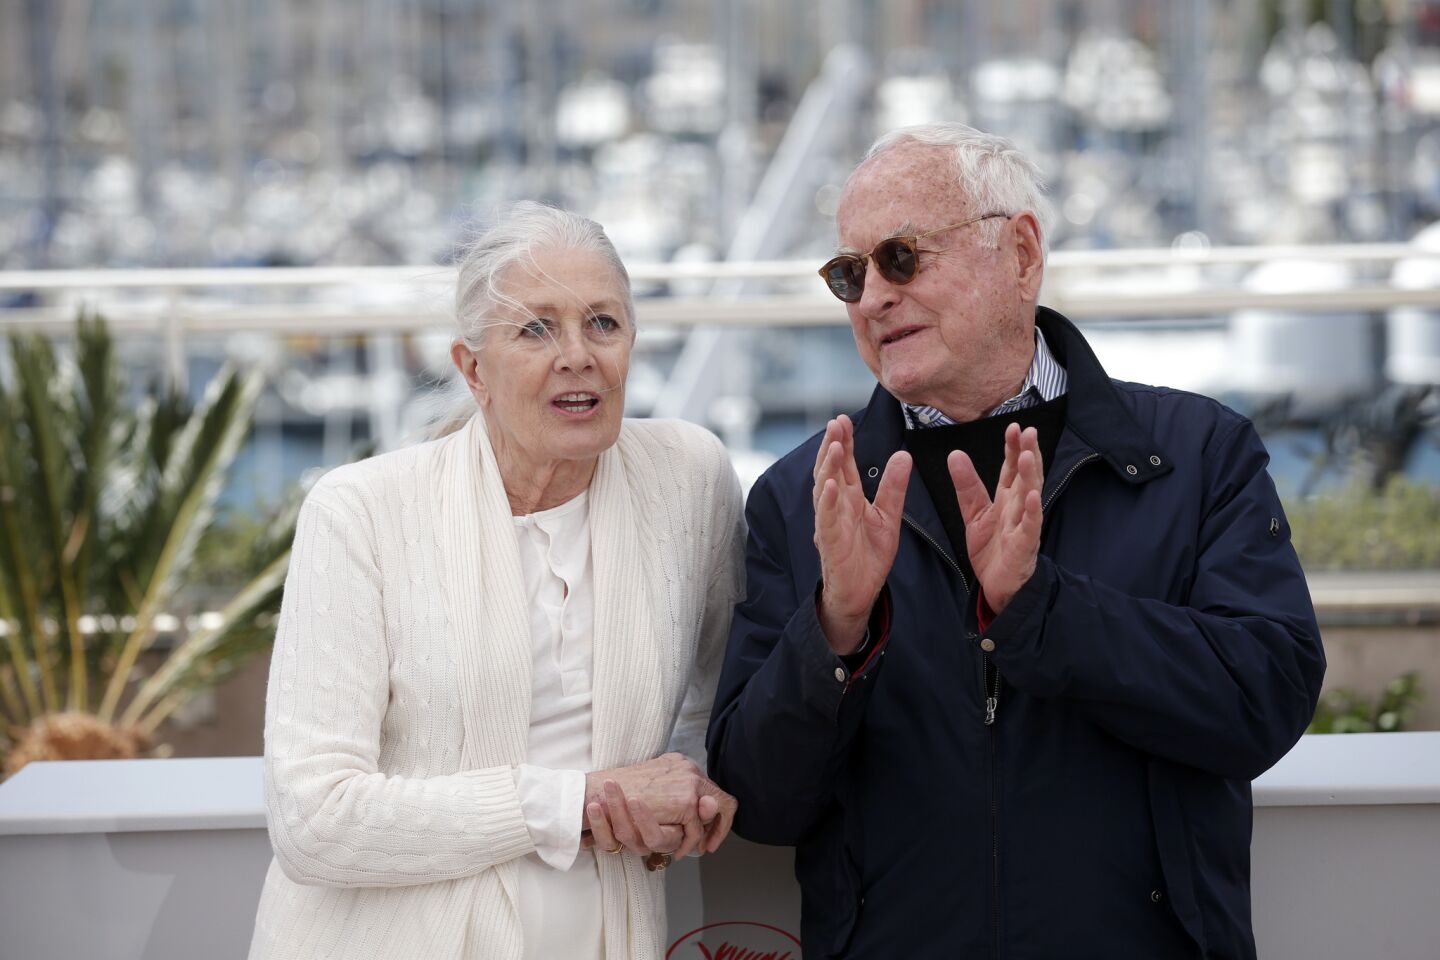 Actress Vanessa Redgrave and director Jim Ivory of the 1992 film "Howard's End," which is screening in the Cannes Classics section.